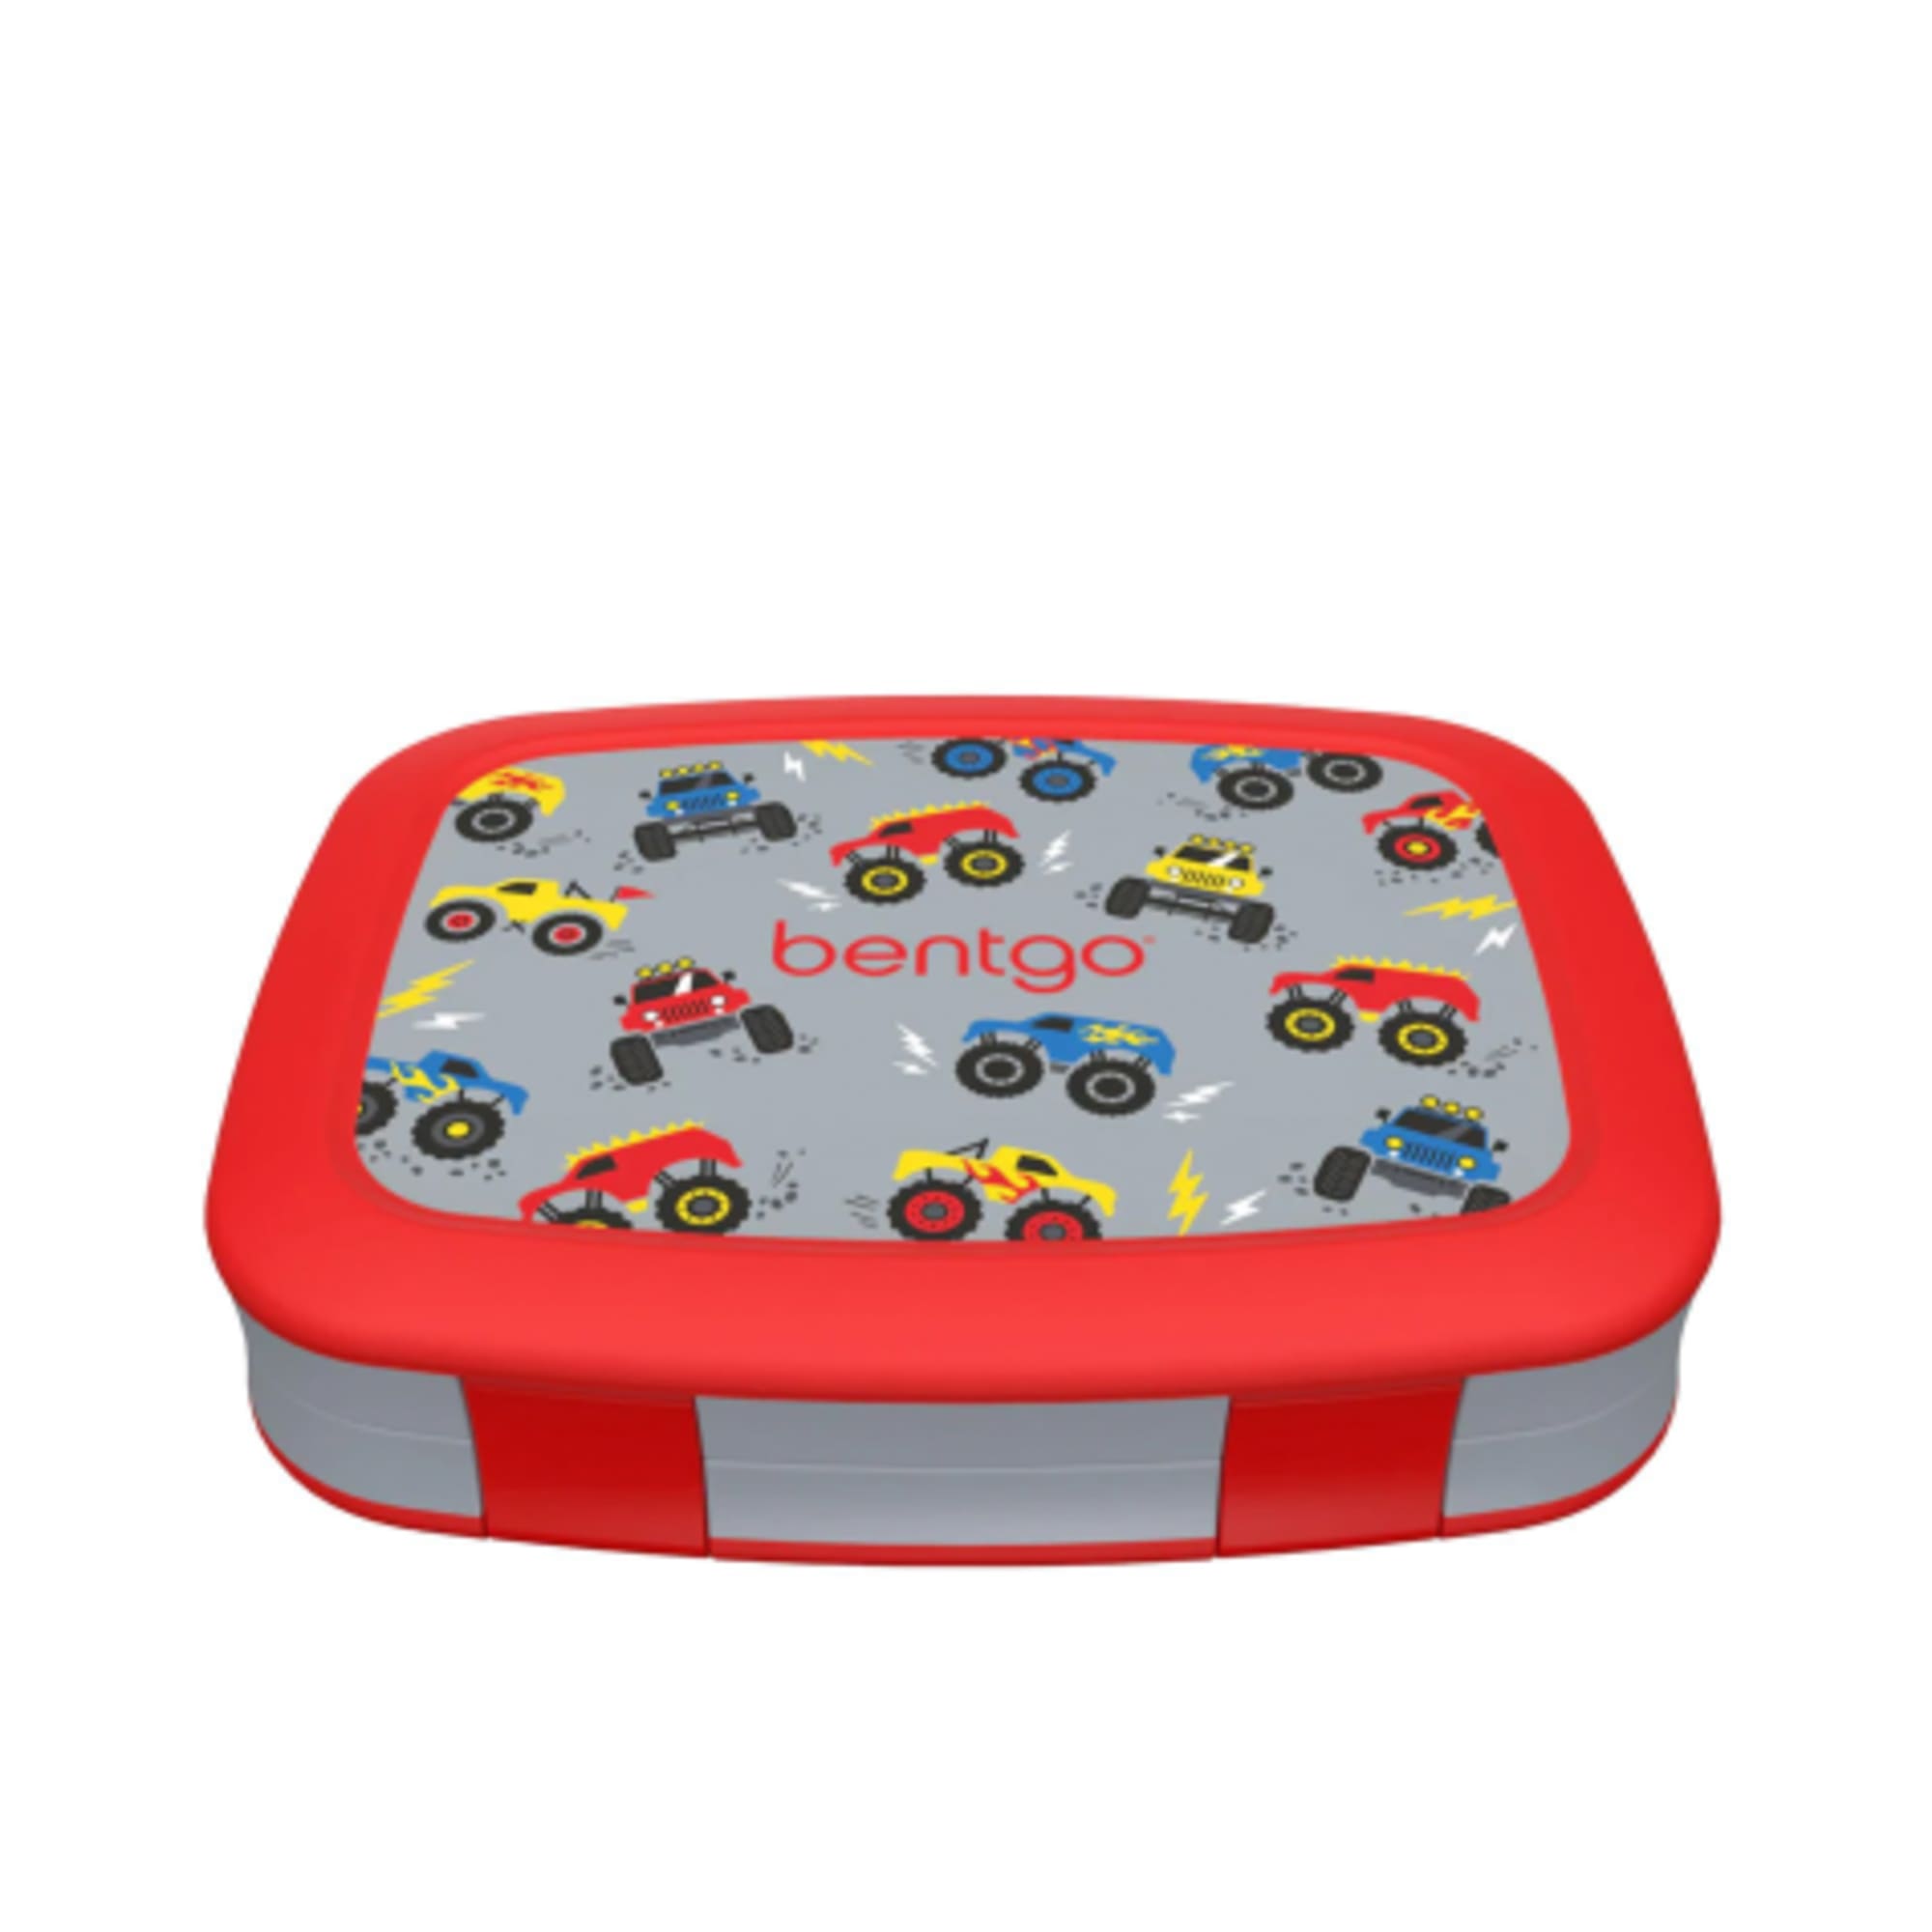 https://res.cloudinary.com/kitchenwarehouse/image/upload/c_fill,g_face,w_475/f_auto/t_PDP_2000x2000/Supplier%20Images%20/2000px/Bentgo-Kids-Leak-Proof-Bento-Box-Trucks_1_2000px.jpg